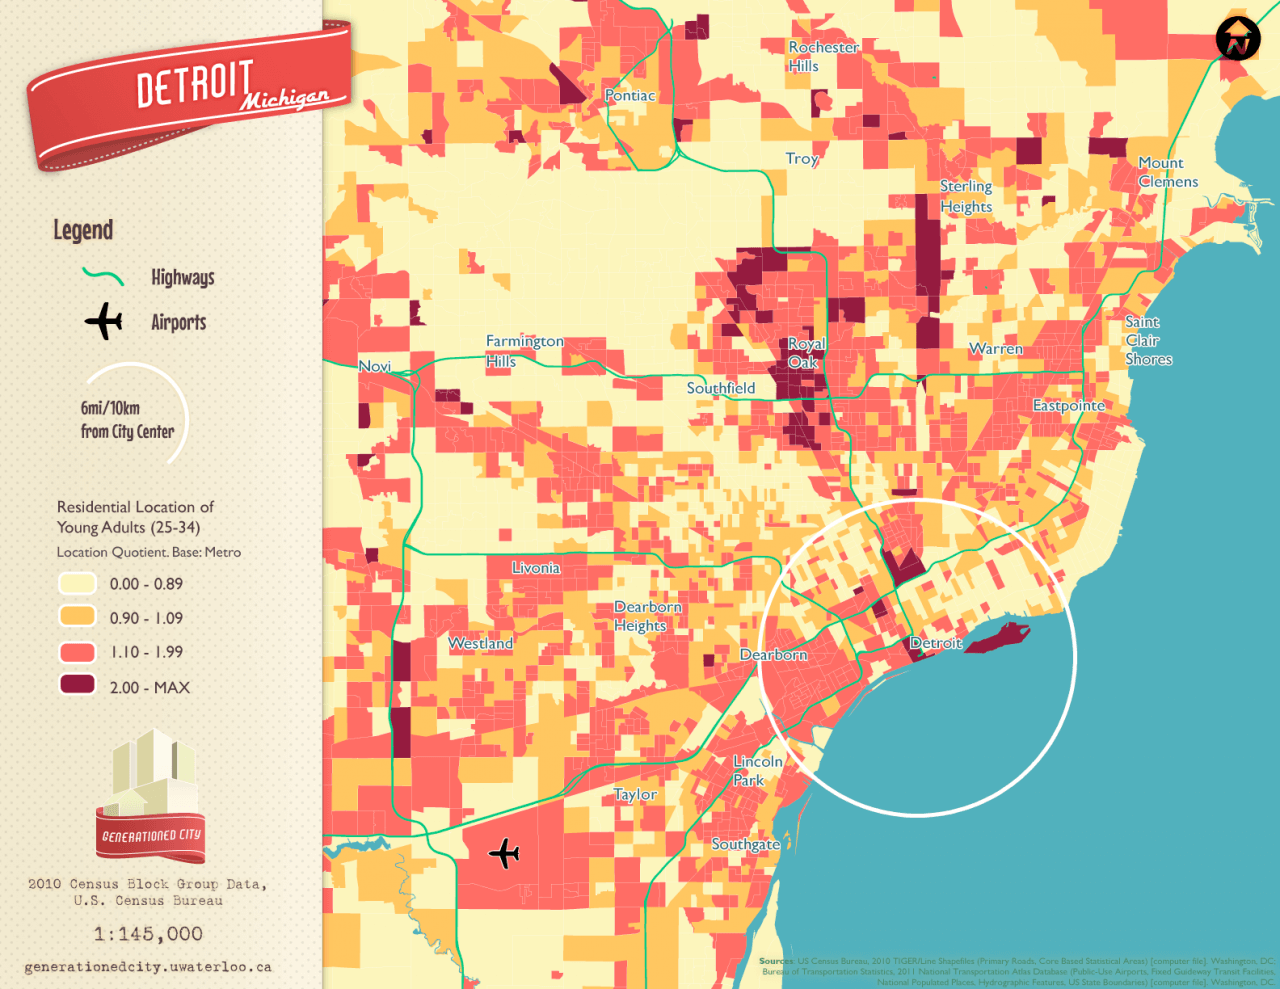 Residential location of young adults in Detroit.